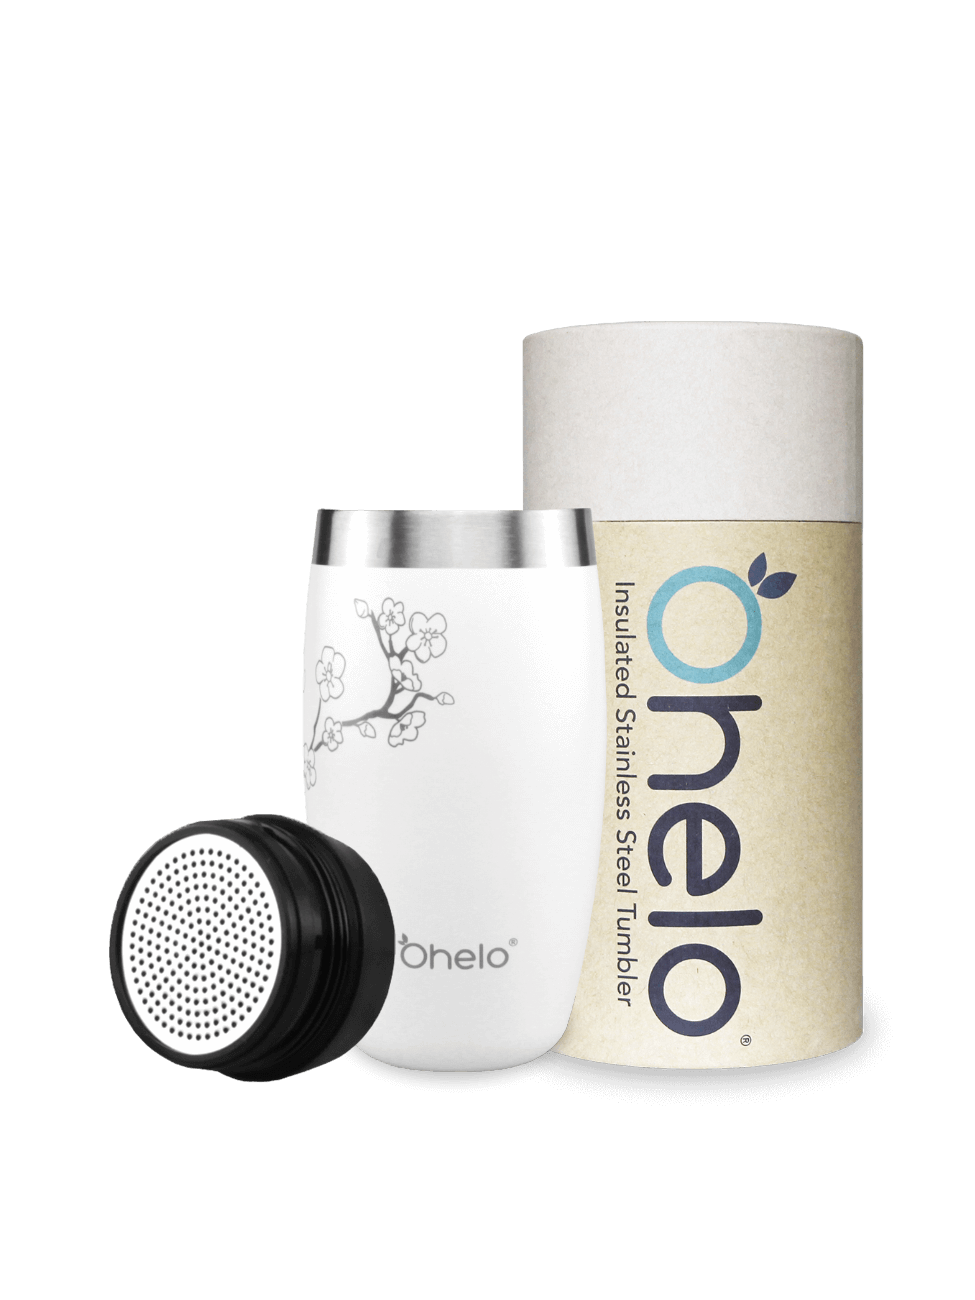 Ohelo dishwasher safe insulated tumbler in white with cherry blossom design with recycled packaging